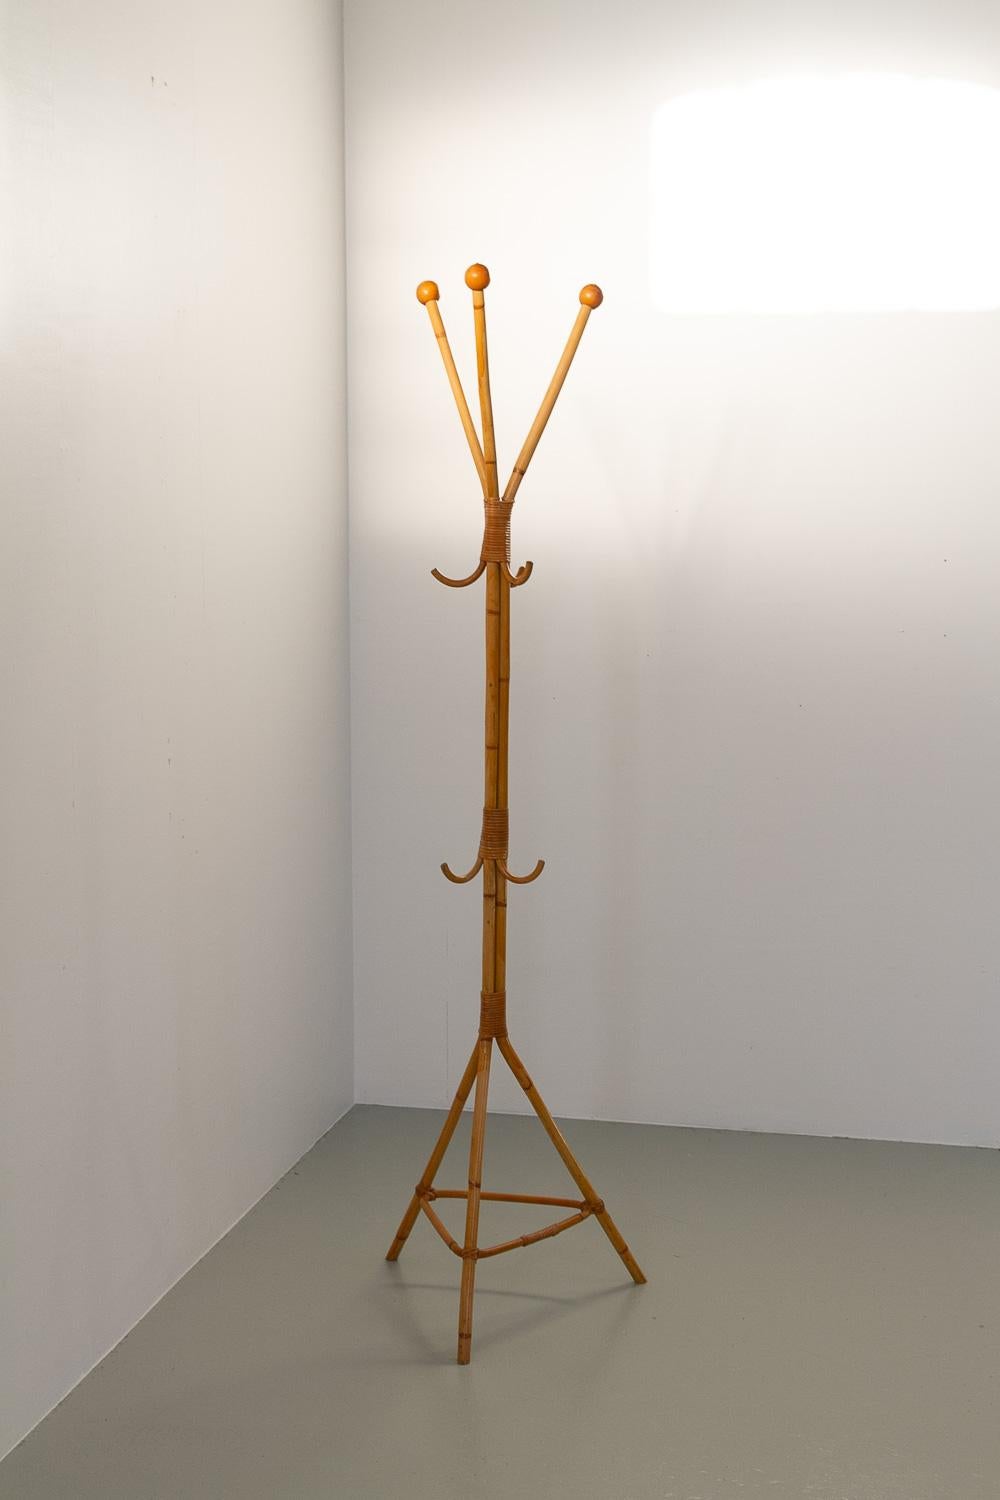 Italian Bamboo Coat Stand, 1960s.

Mid-Century Modern freestanding coat rack in bamboo and rattan made in Italy in the 1960s.
This lovely three-legged coat stand is fairly narrow and doesn't take up much space. Six hooks and three arms. Decorative